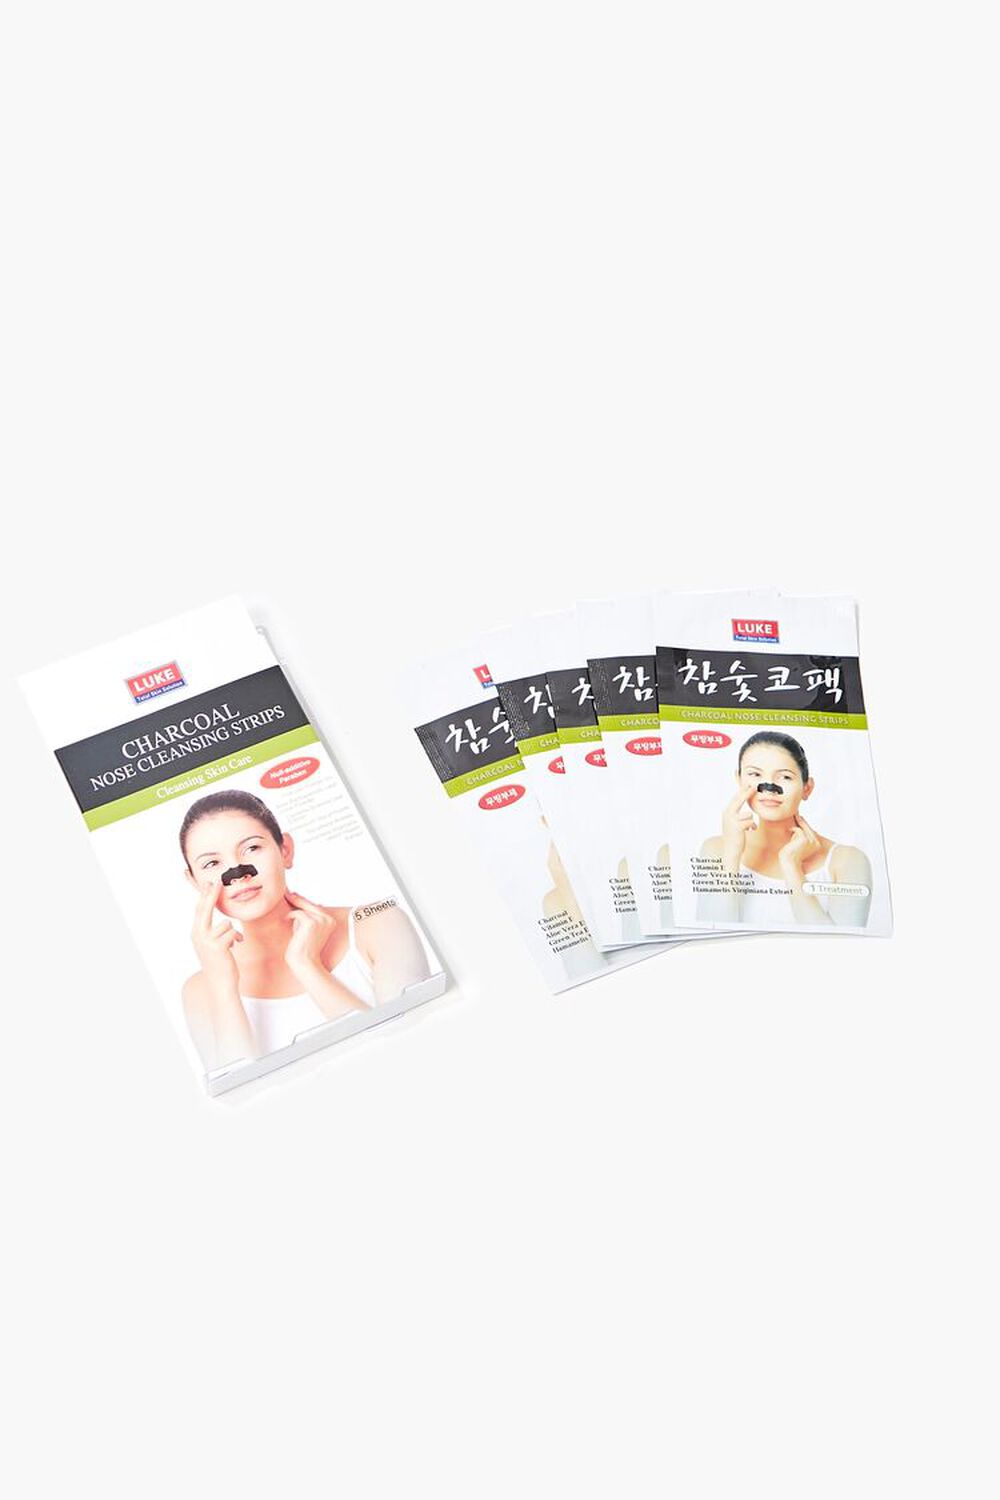 BLACK Charcoal Nose Cleansing Strips, image 1